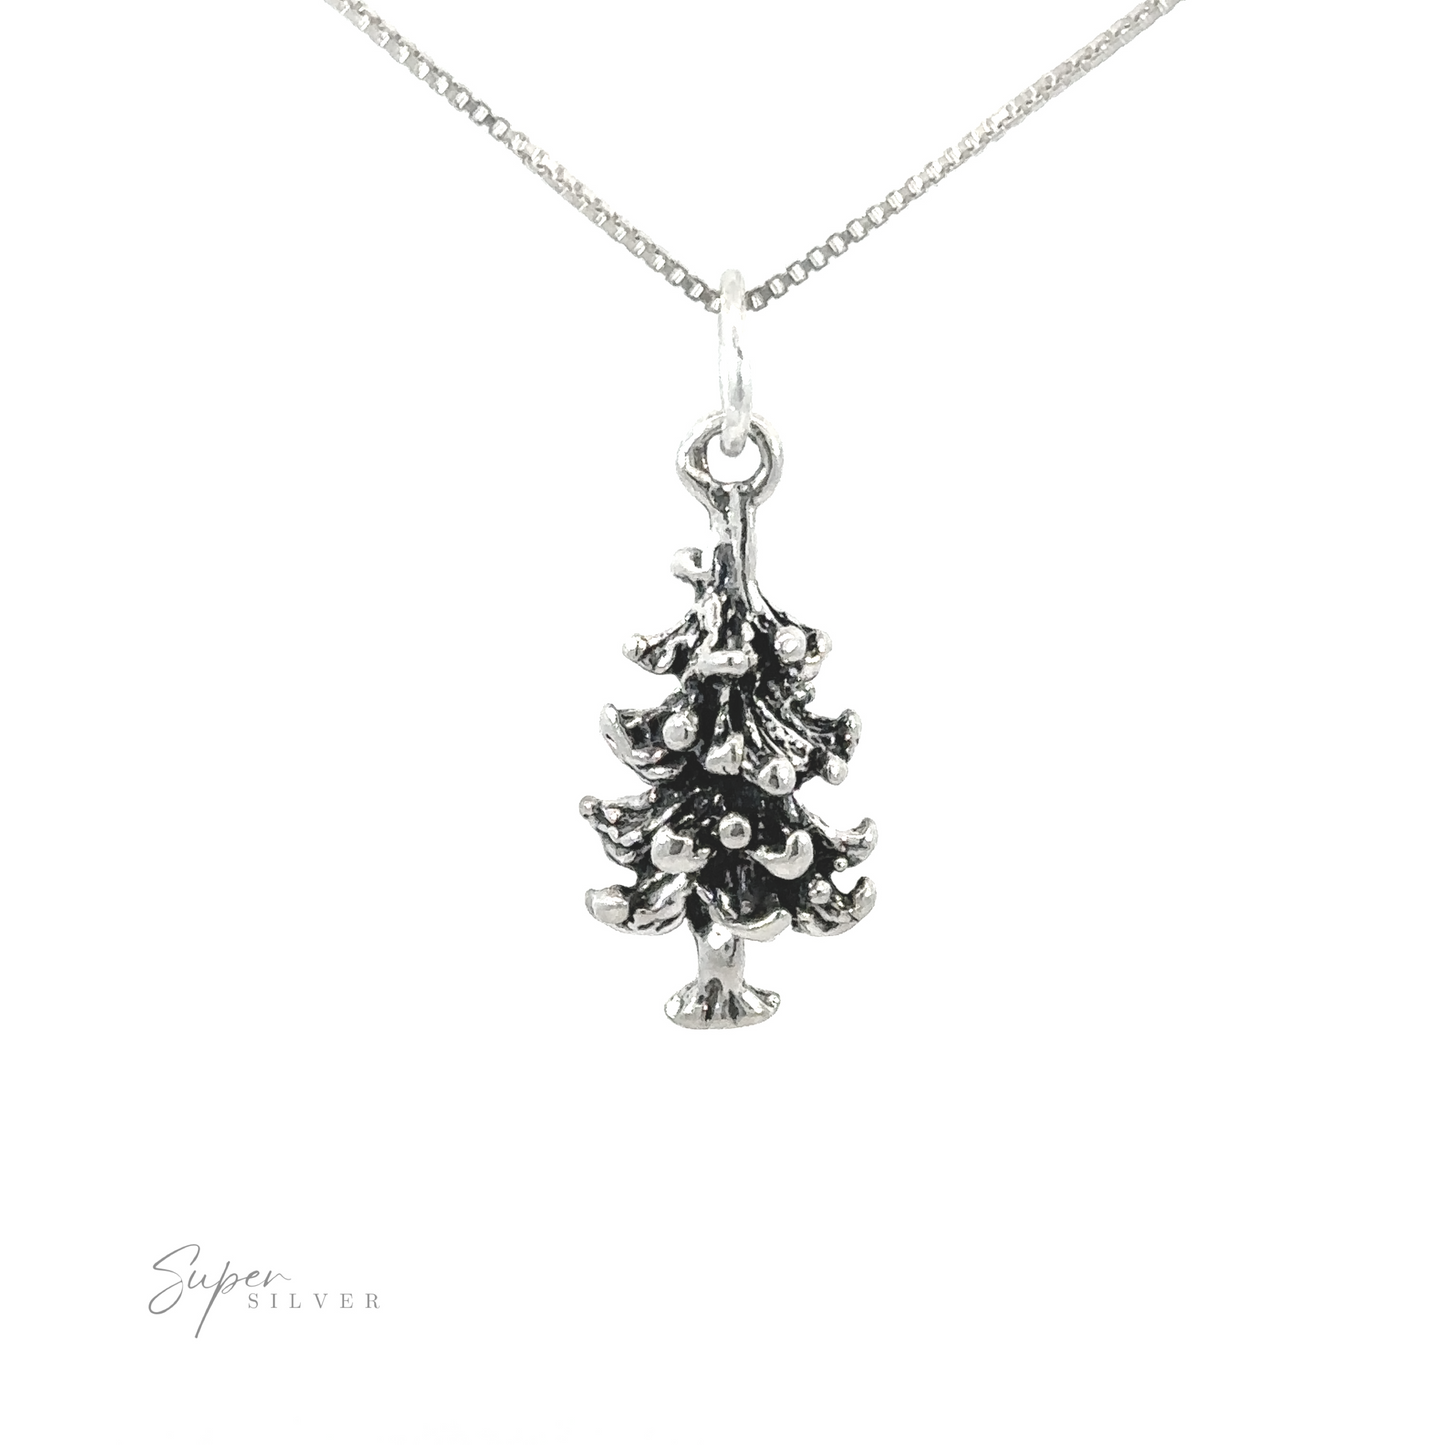 A .925 Sterling Silver Christmas Tree Charm on a chain.